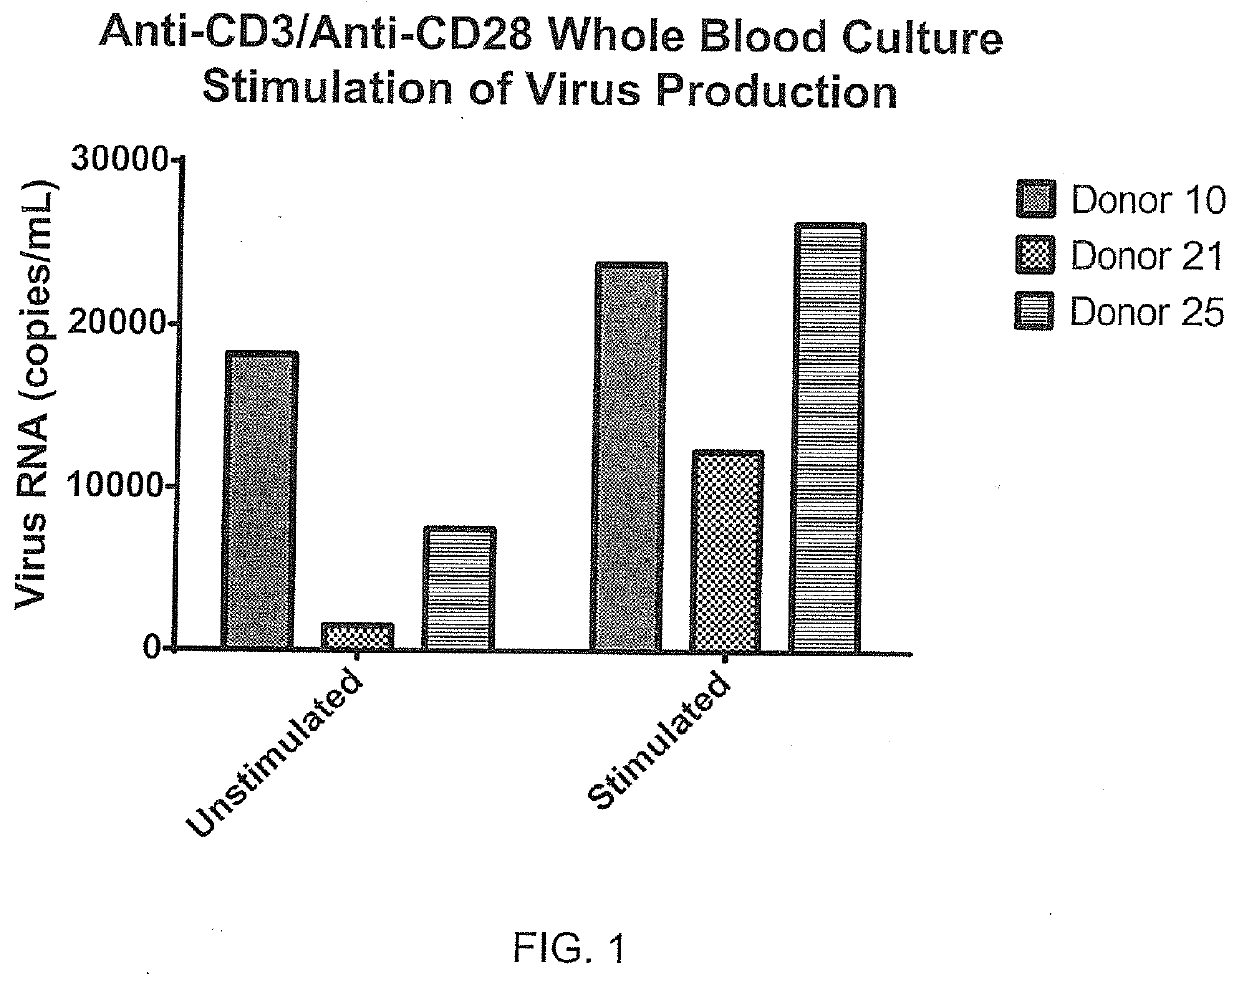 Utilities of stimulated whole blood culture systems